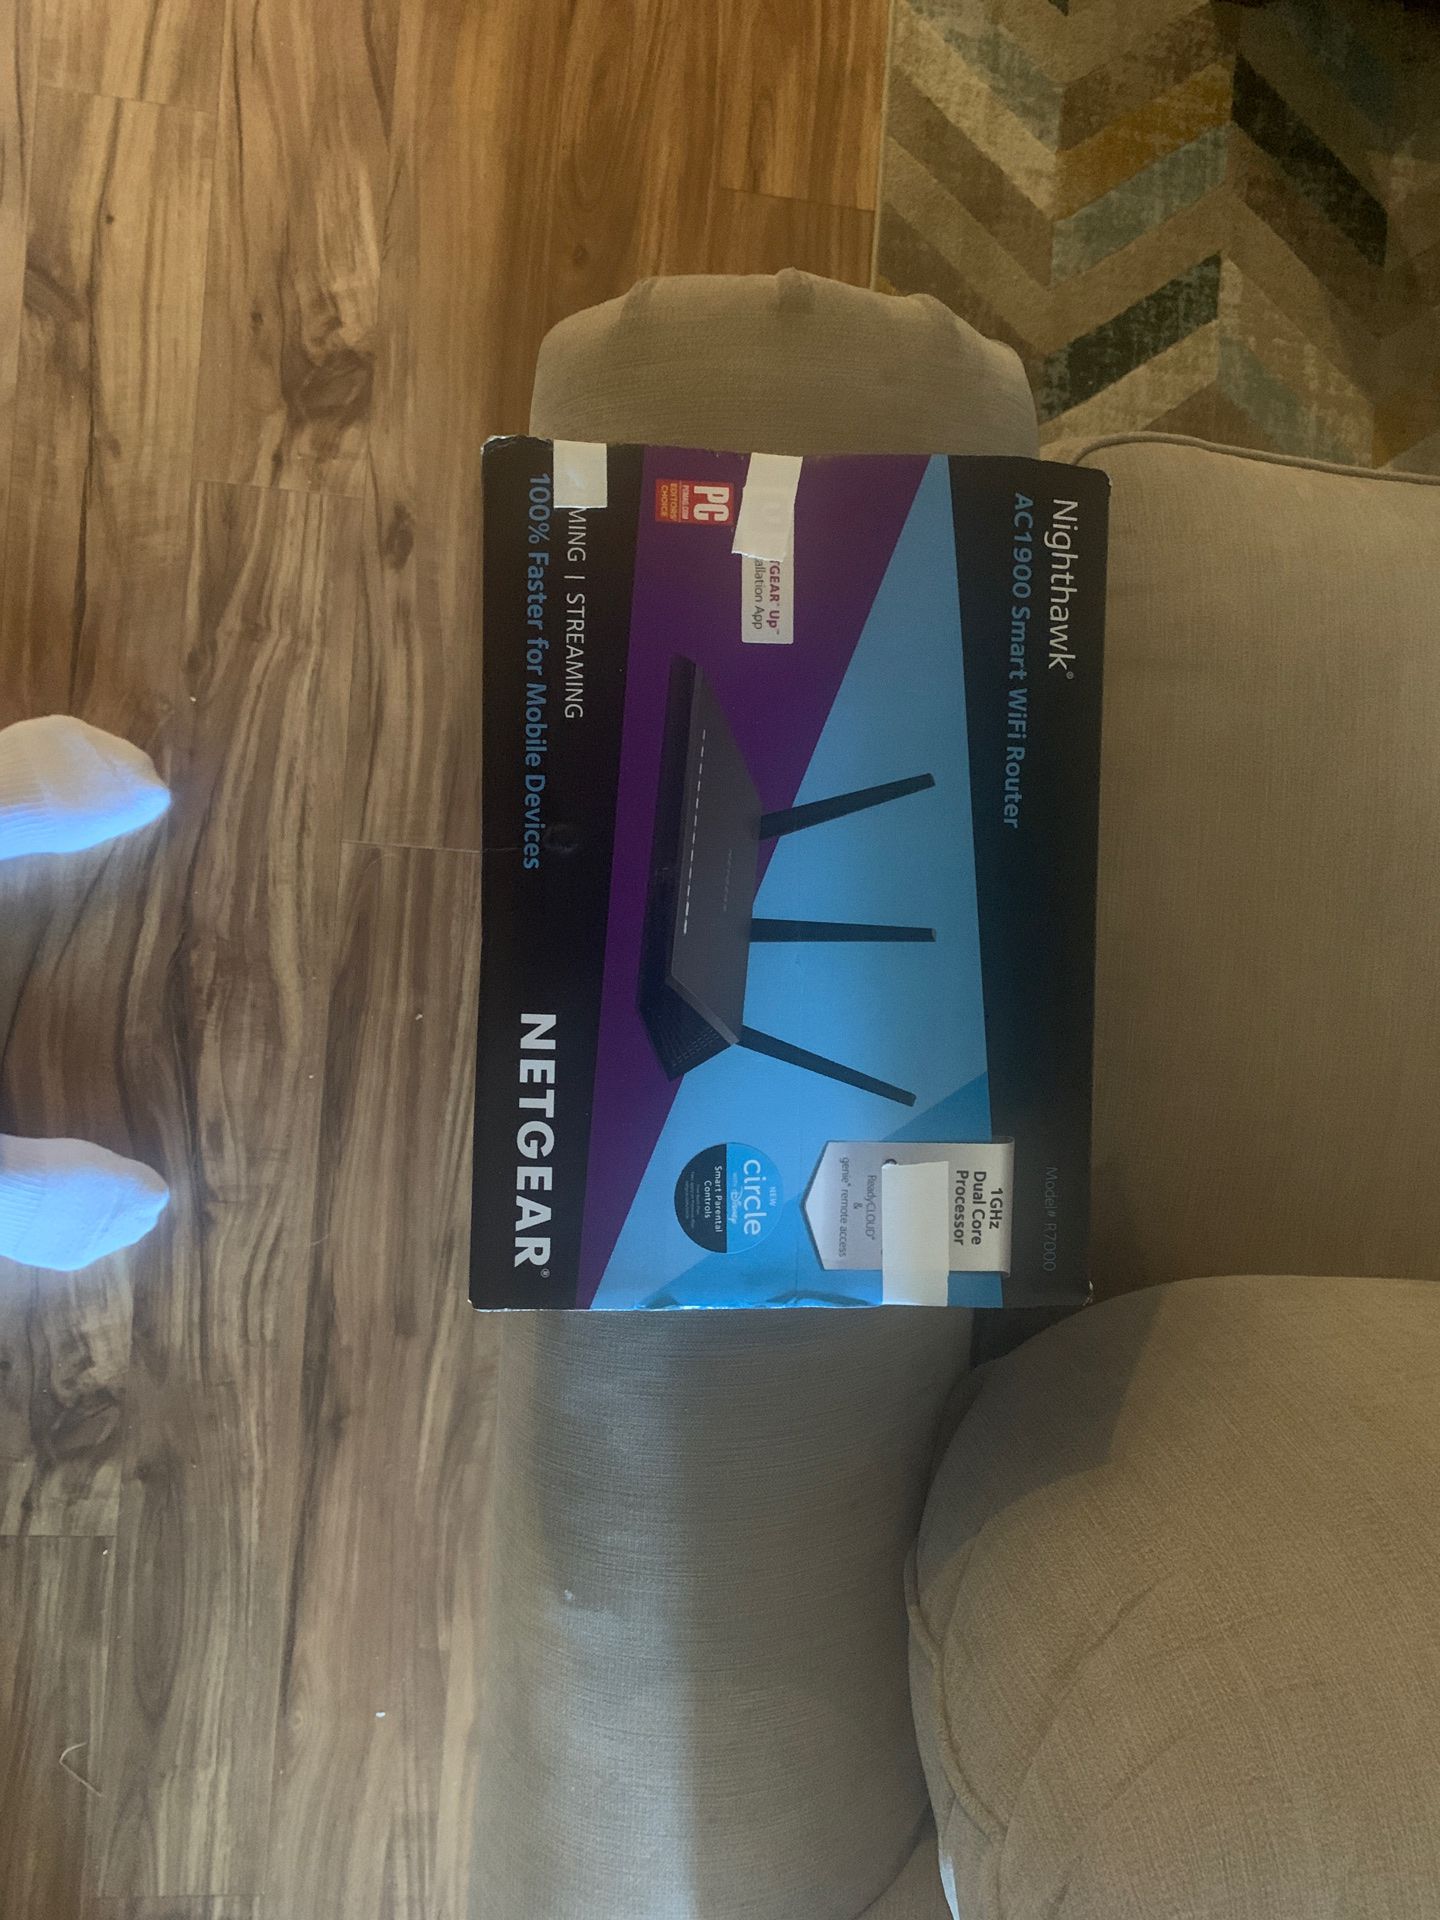 “Price Reduced” Nighthawk AC1900 smart WiFi router ( with a modem thrown in)